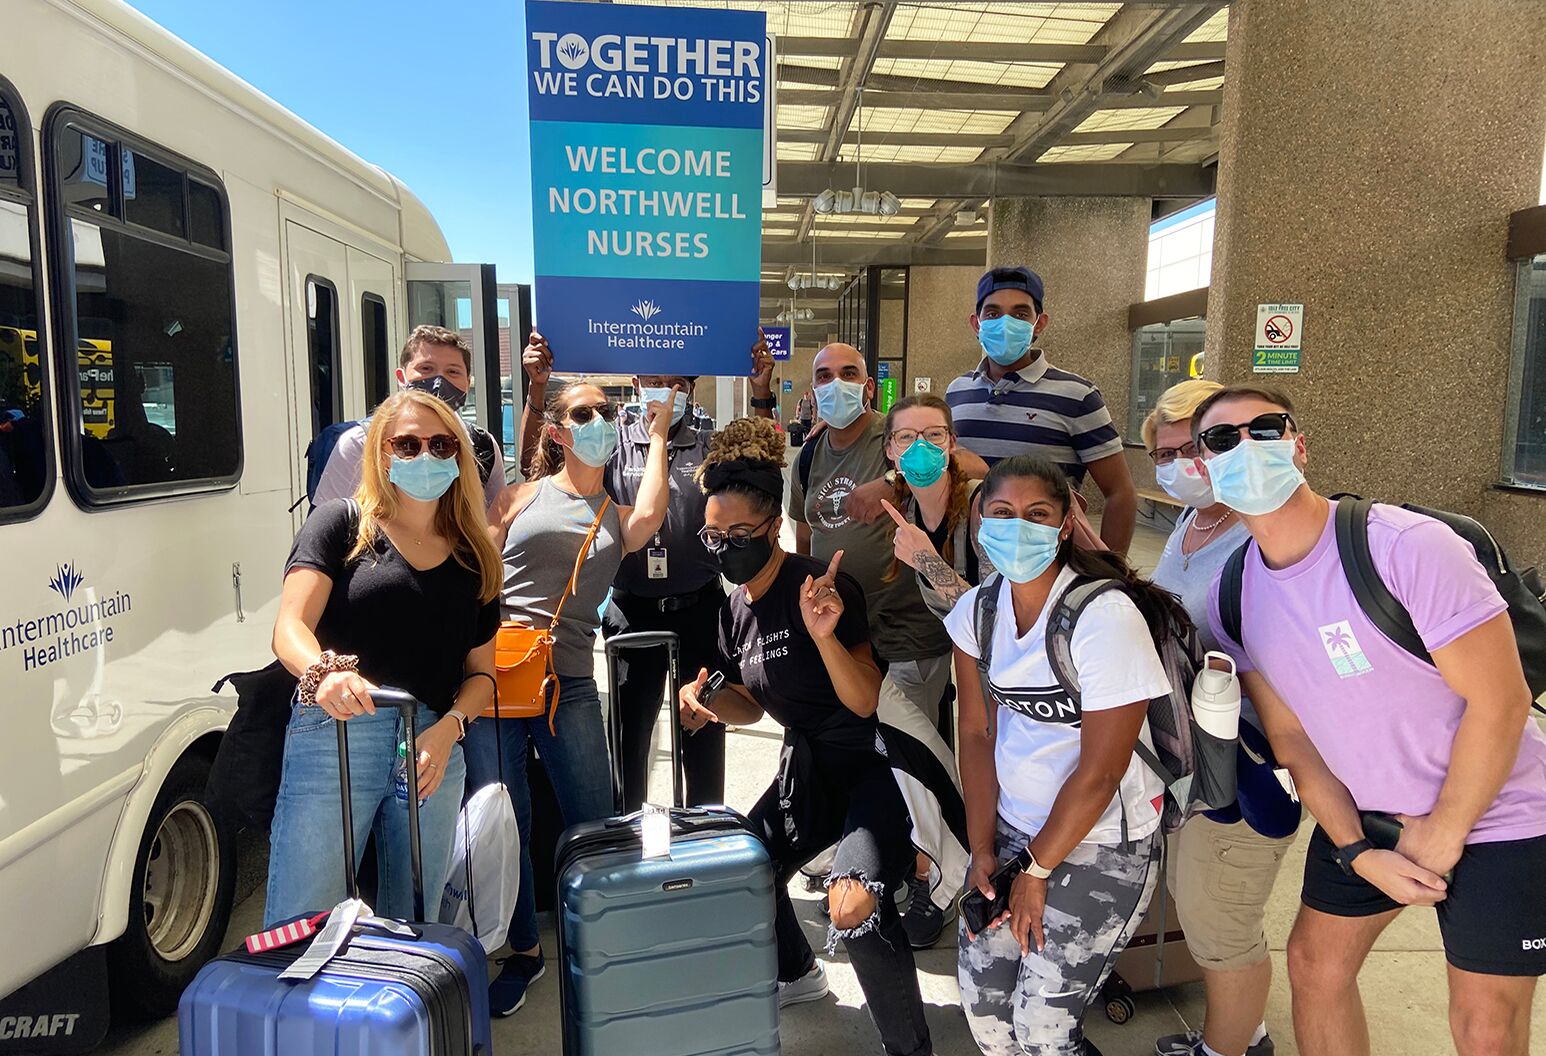 Northwell frontline staff travel in August 2020 to Intermountain Healthcare in Utah to assist colleagues during the Covid-19 